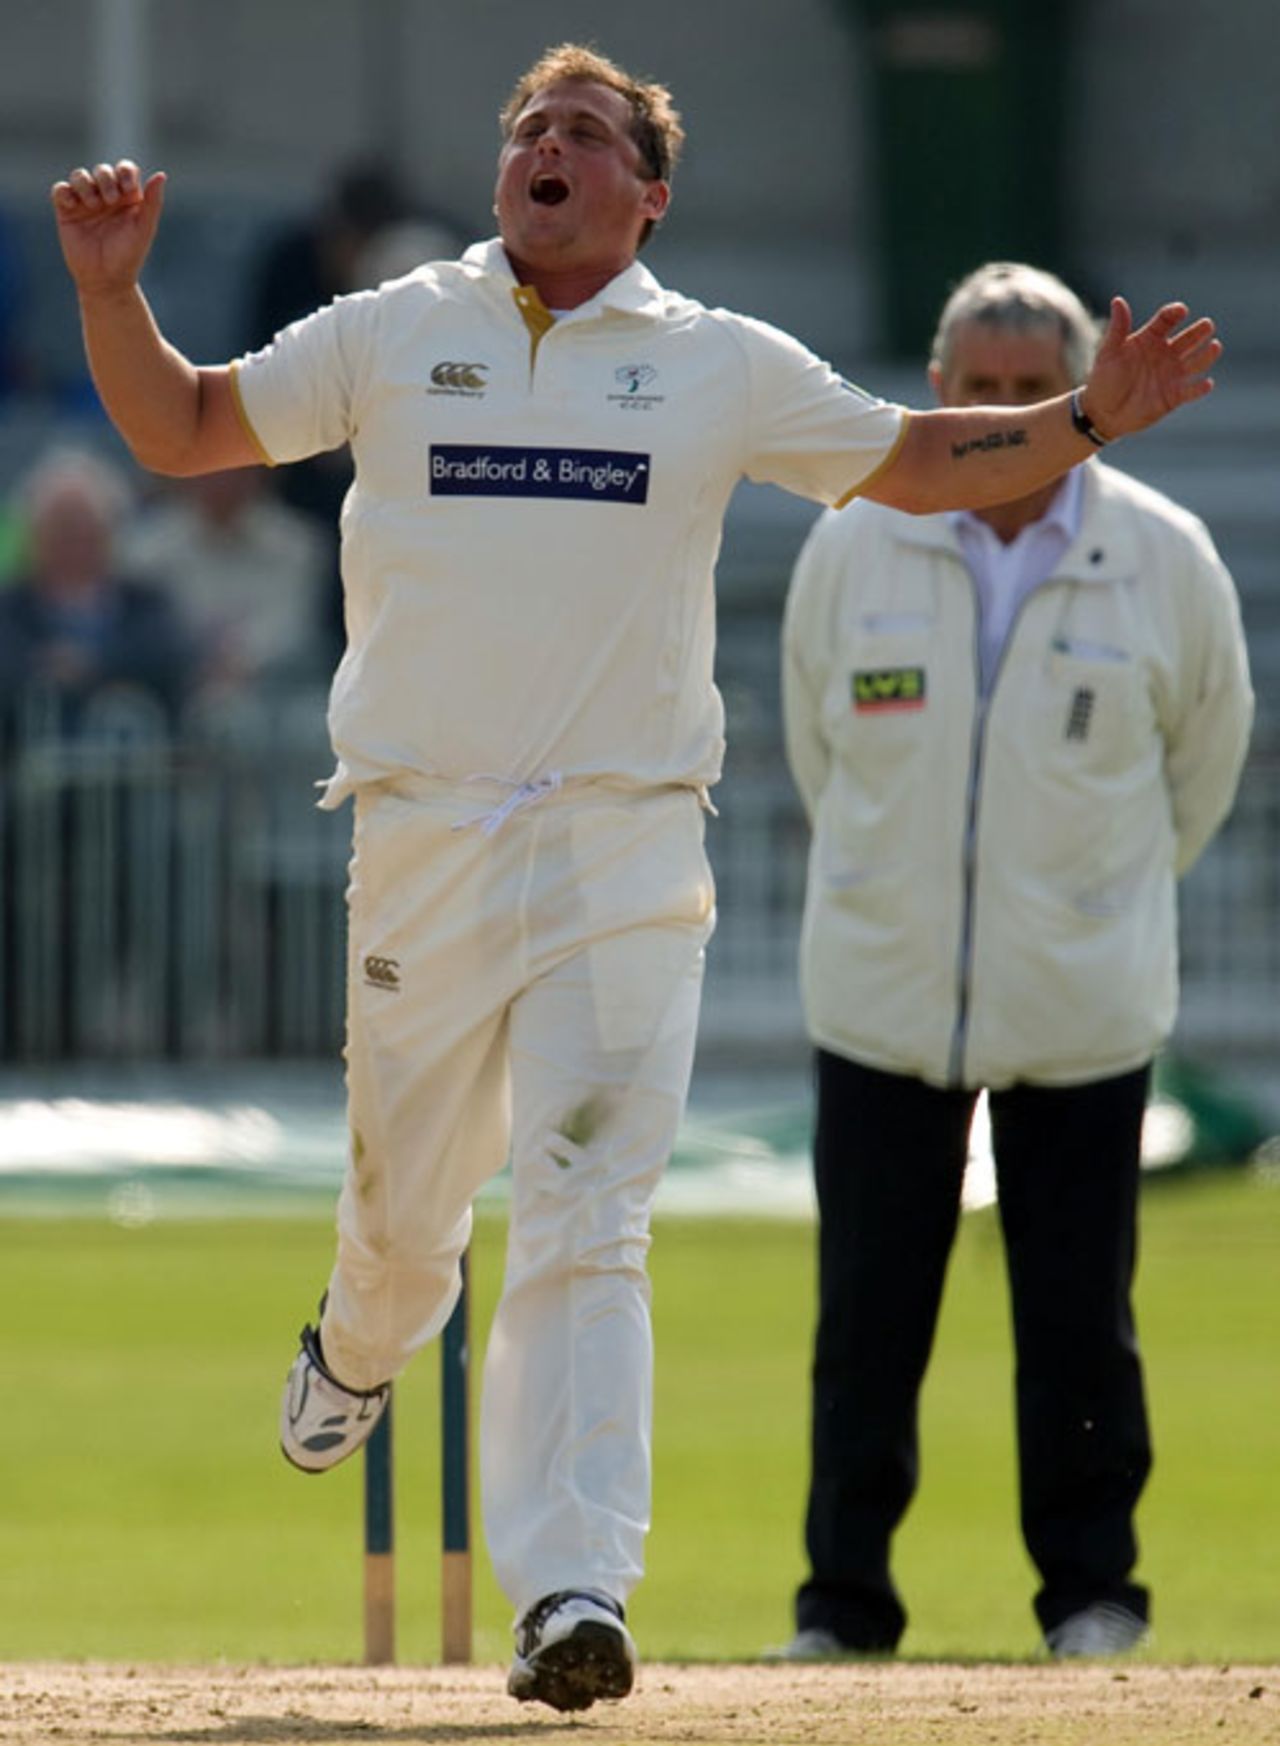 Darren Gough goes close on the final day of Yorkshire's match at Scarborough, Yorkshire v Somerset, Scarborough, September 20, 2008